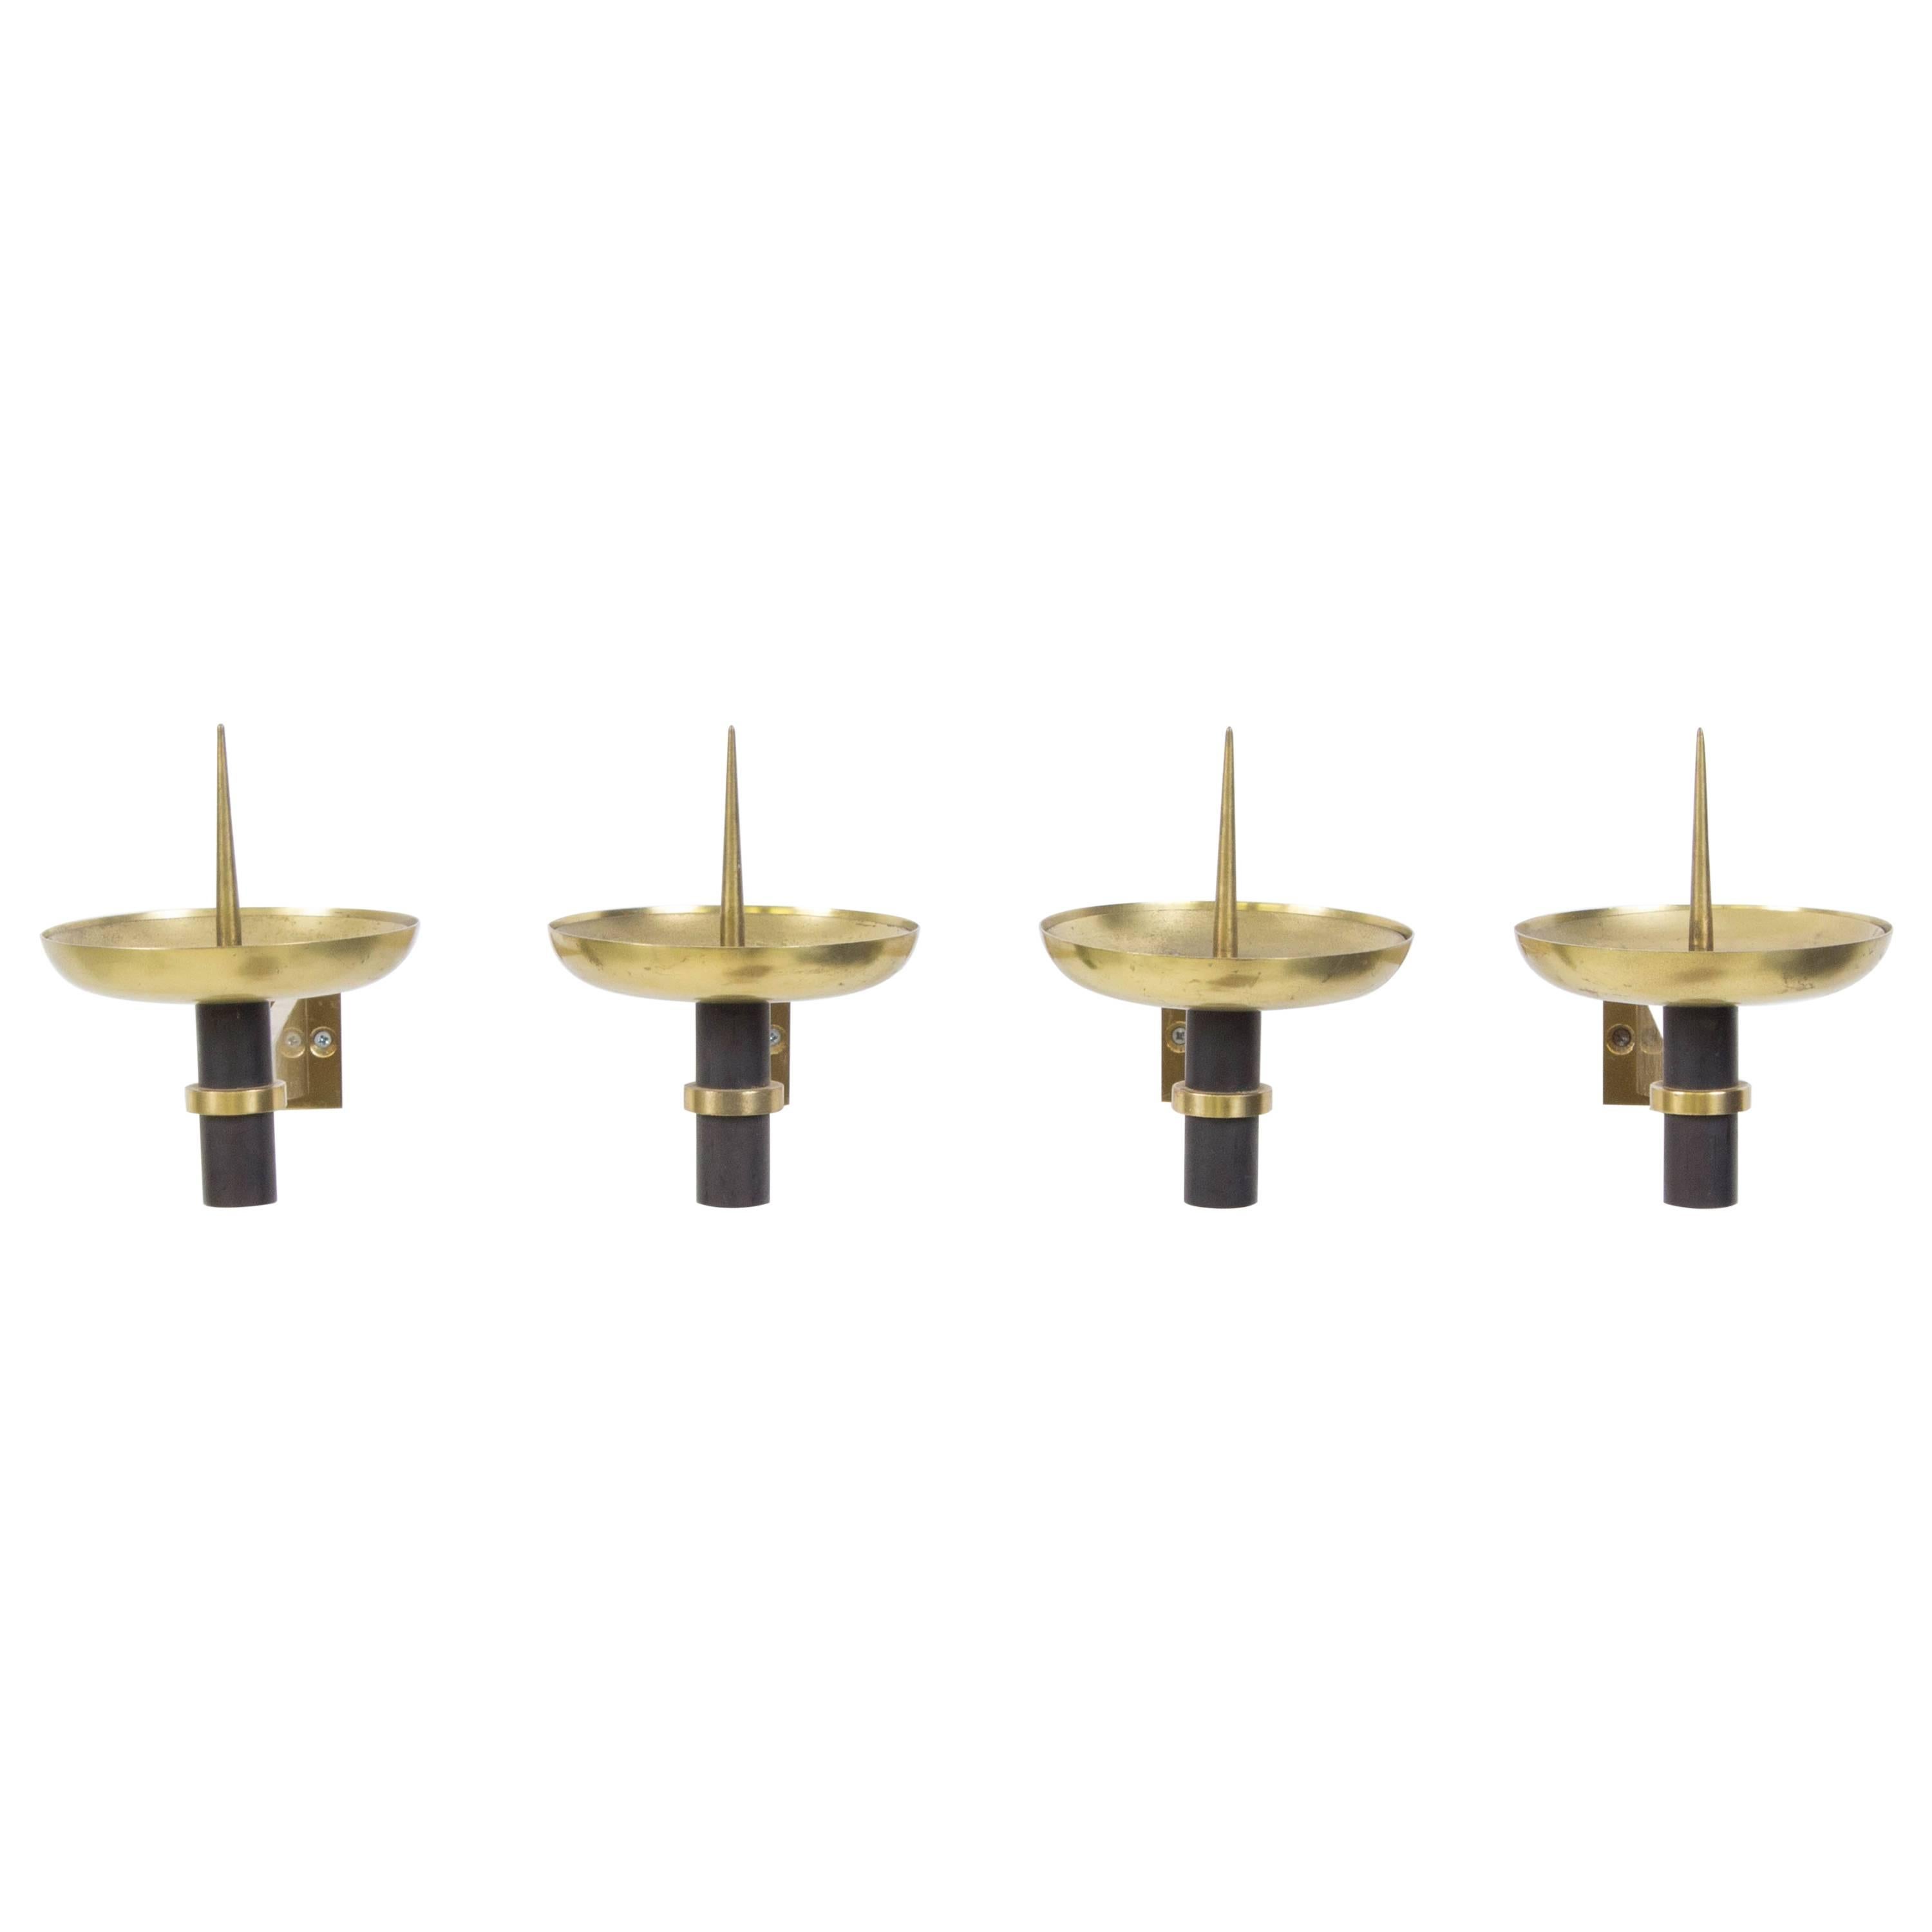 Rare Set of Four French Mid-Century Modern Wall Candle Sconces, 1950s